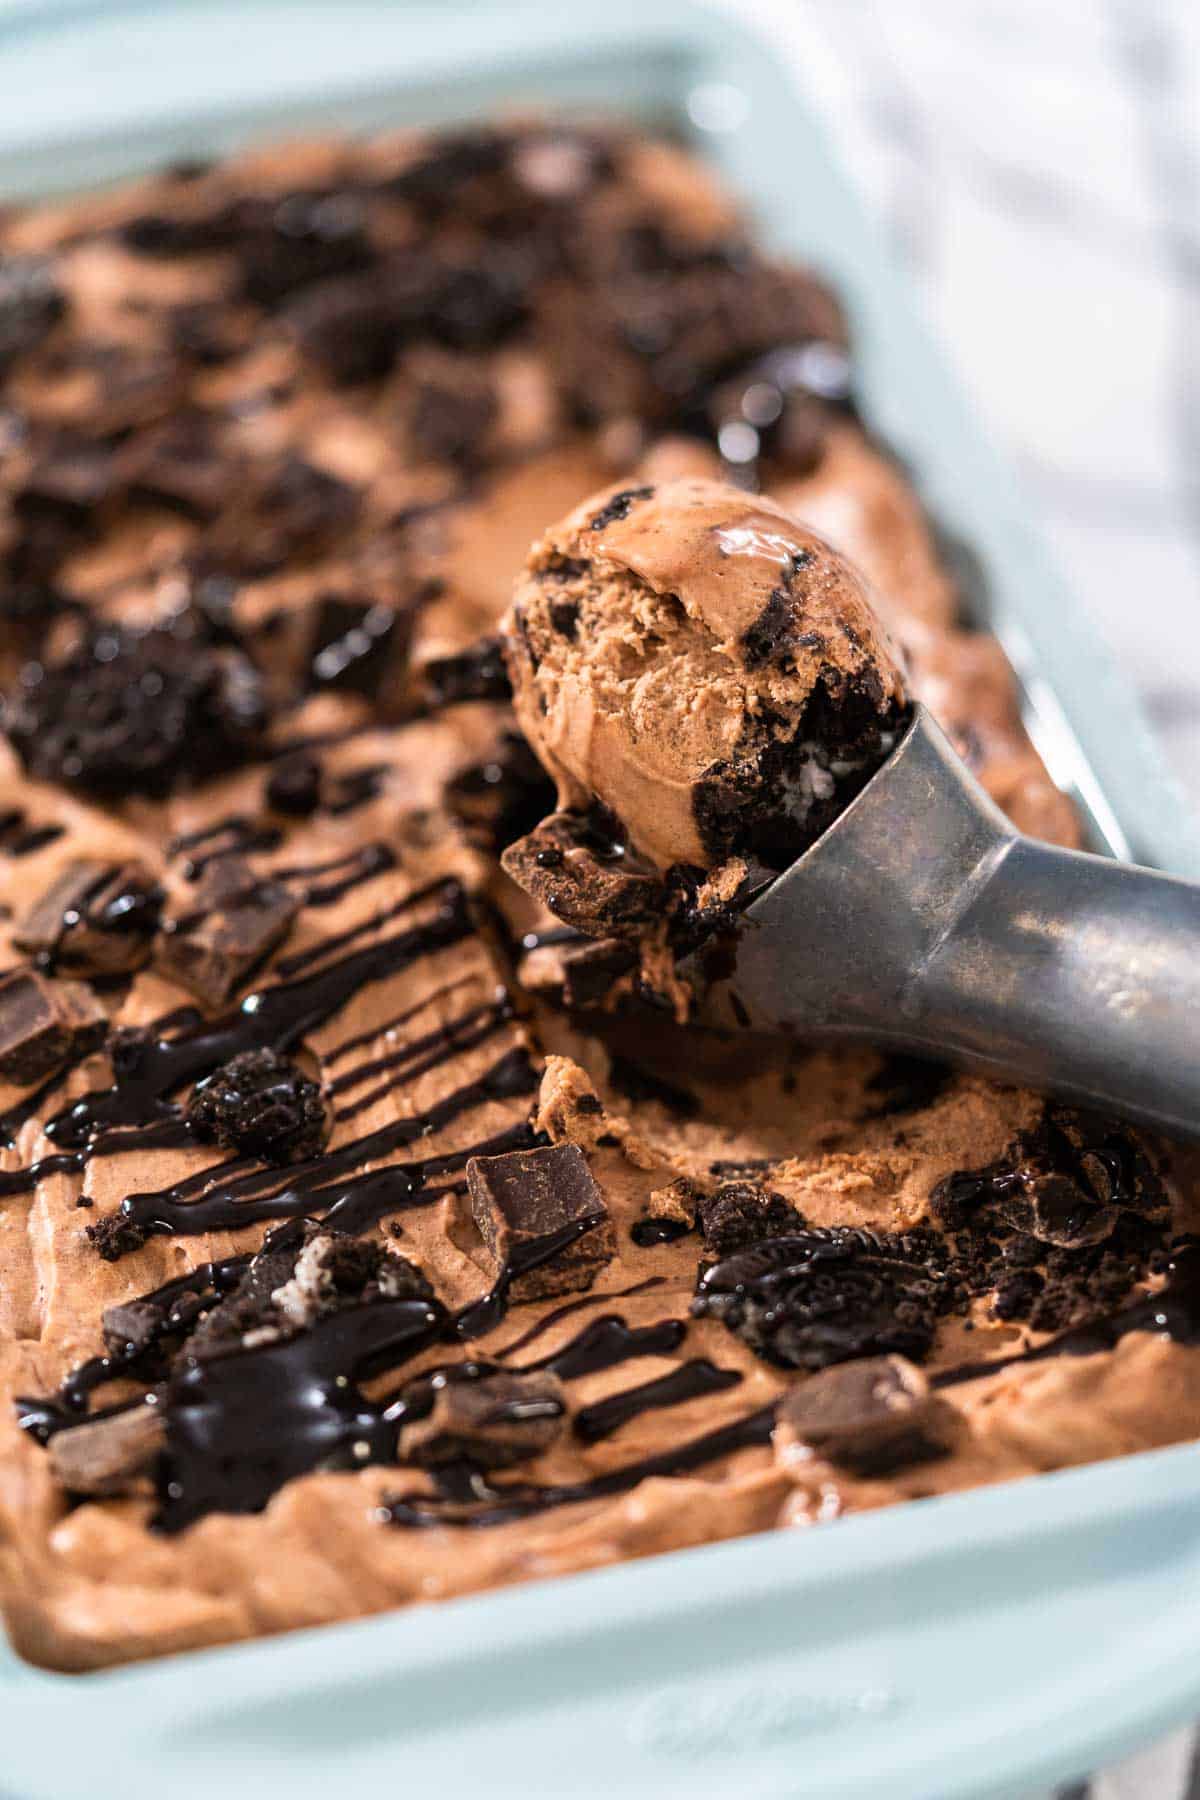 A close up of a pan of ice cream with a scoop taking out chocolate.